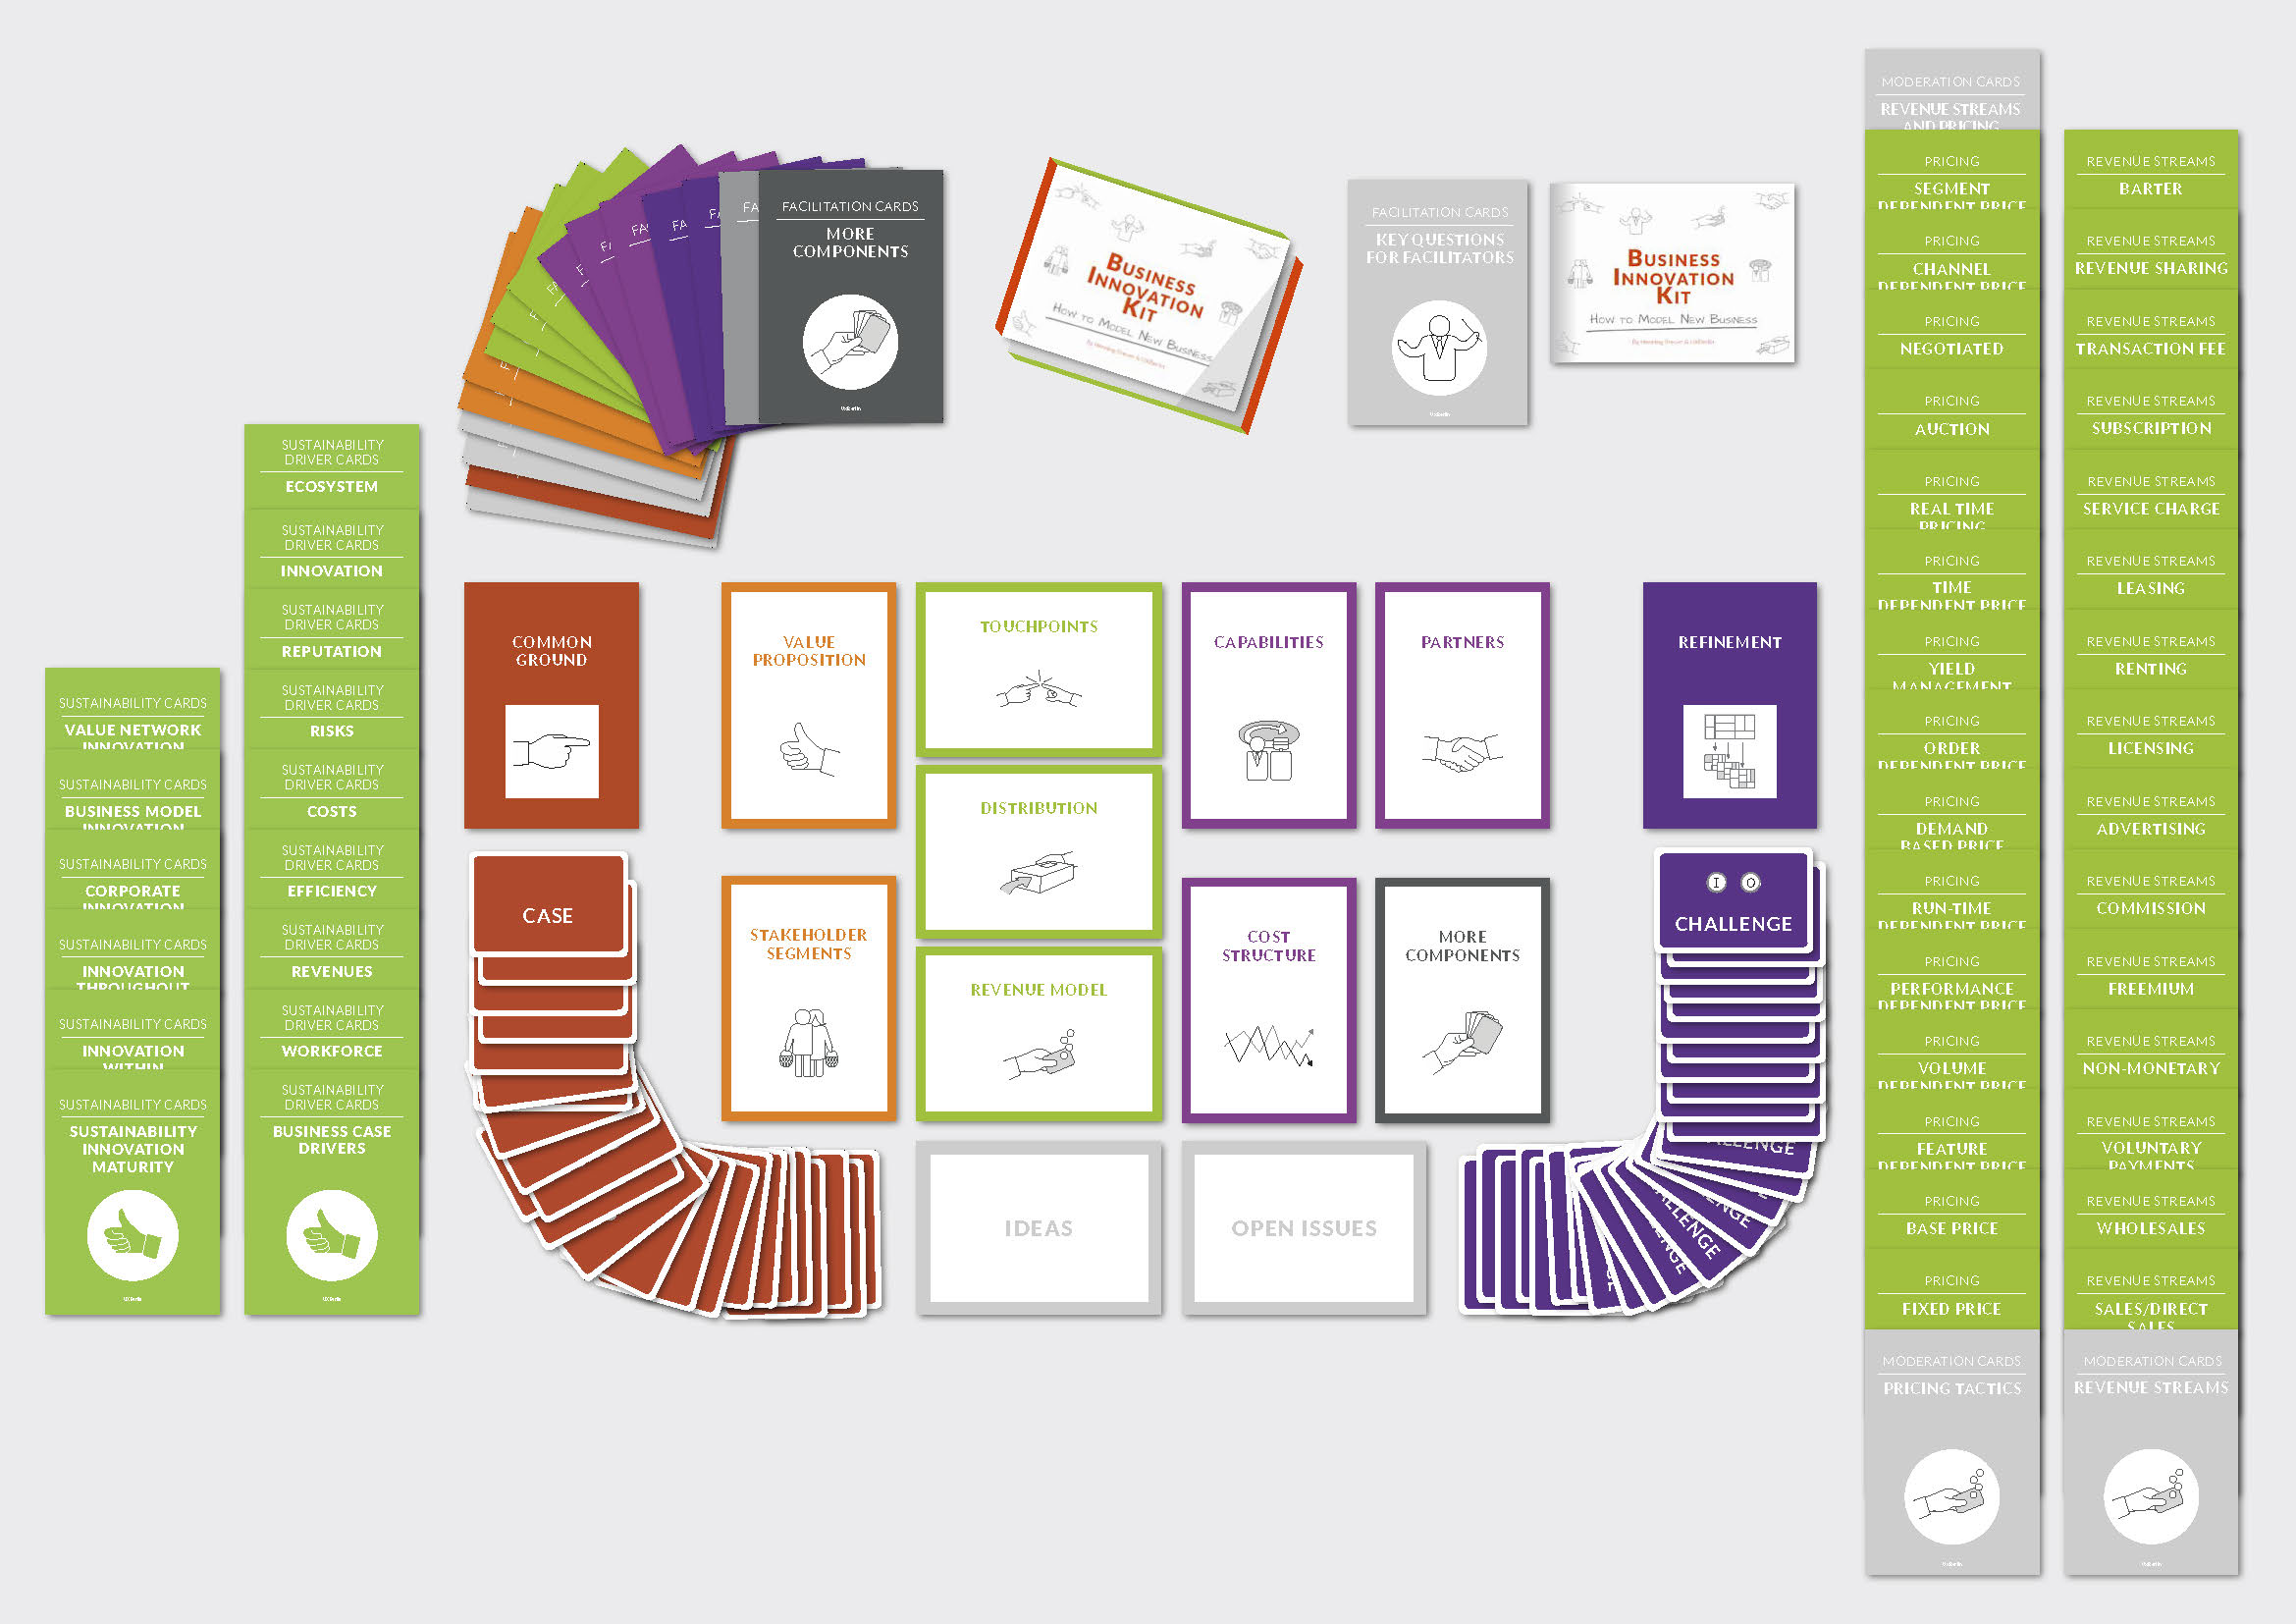 Components and more. Sustainability Cards. Most components.